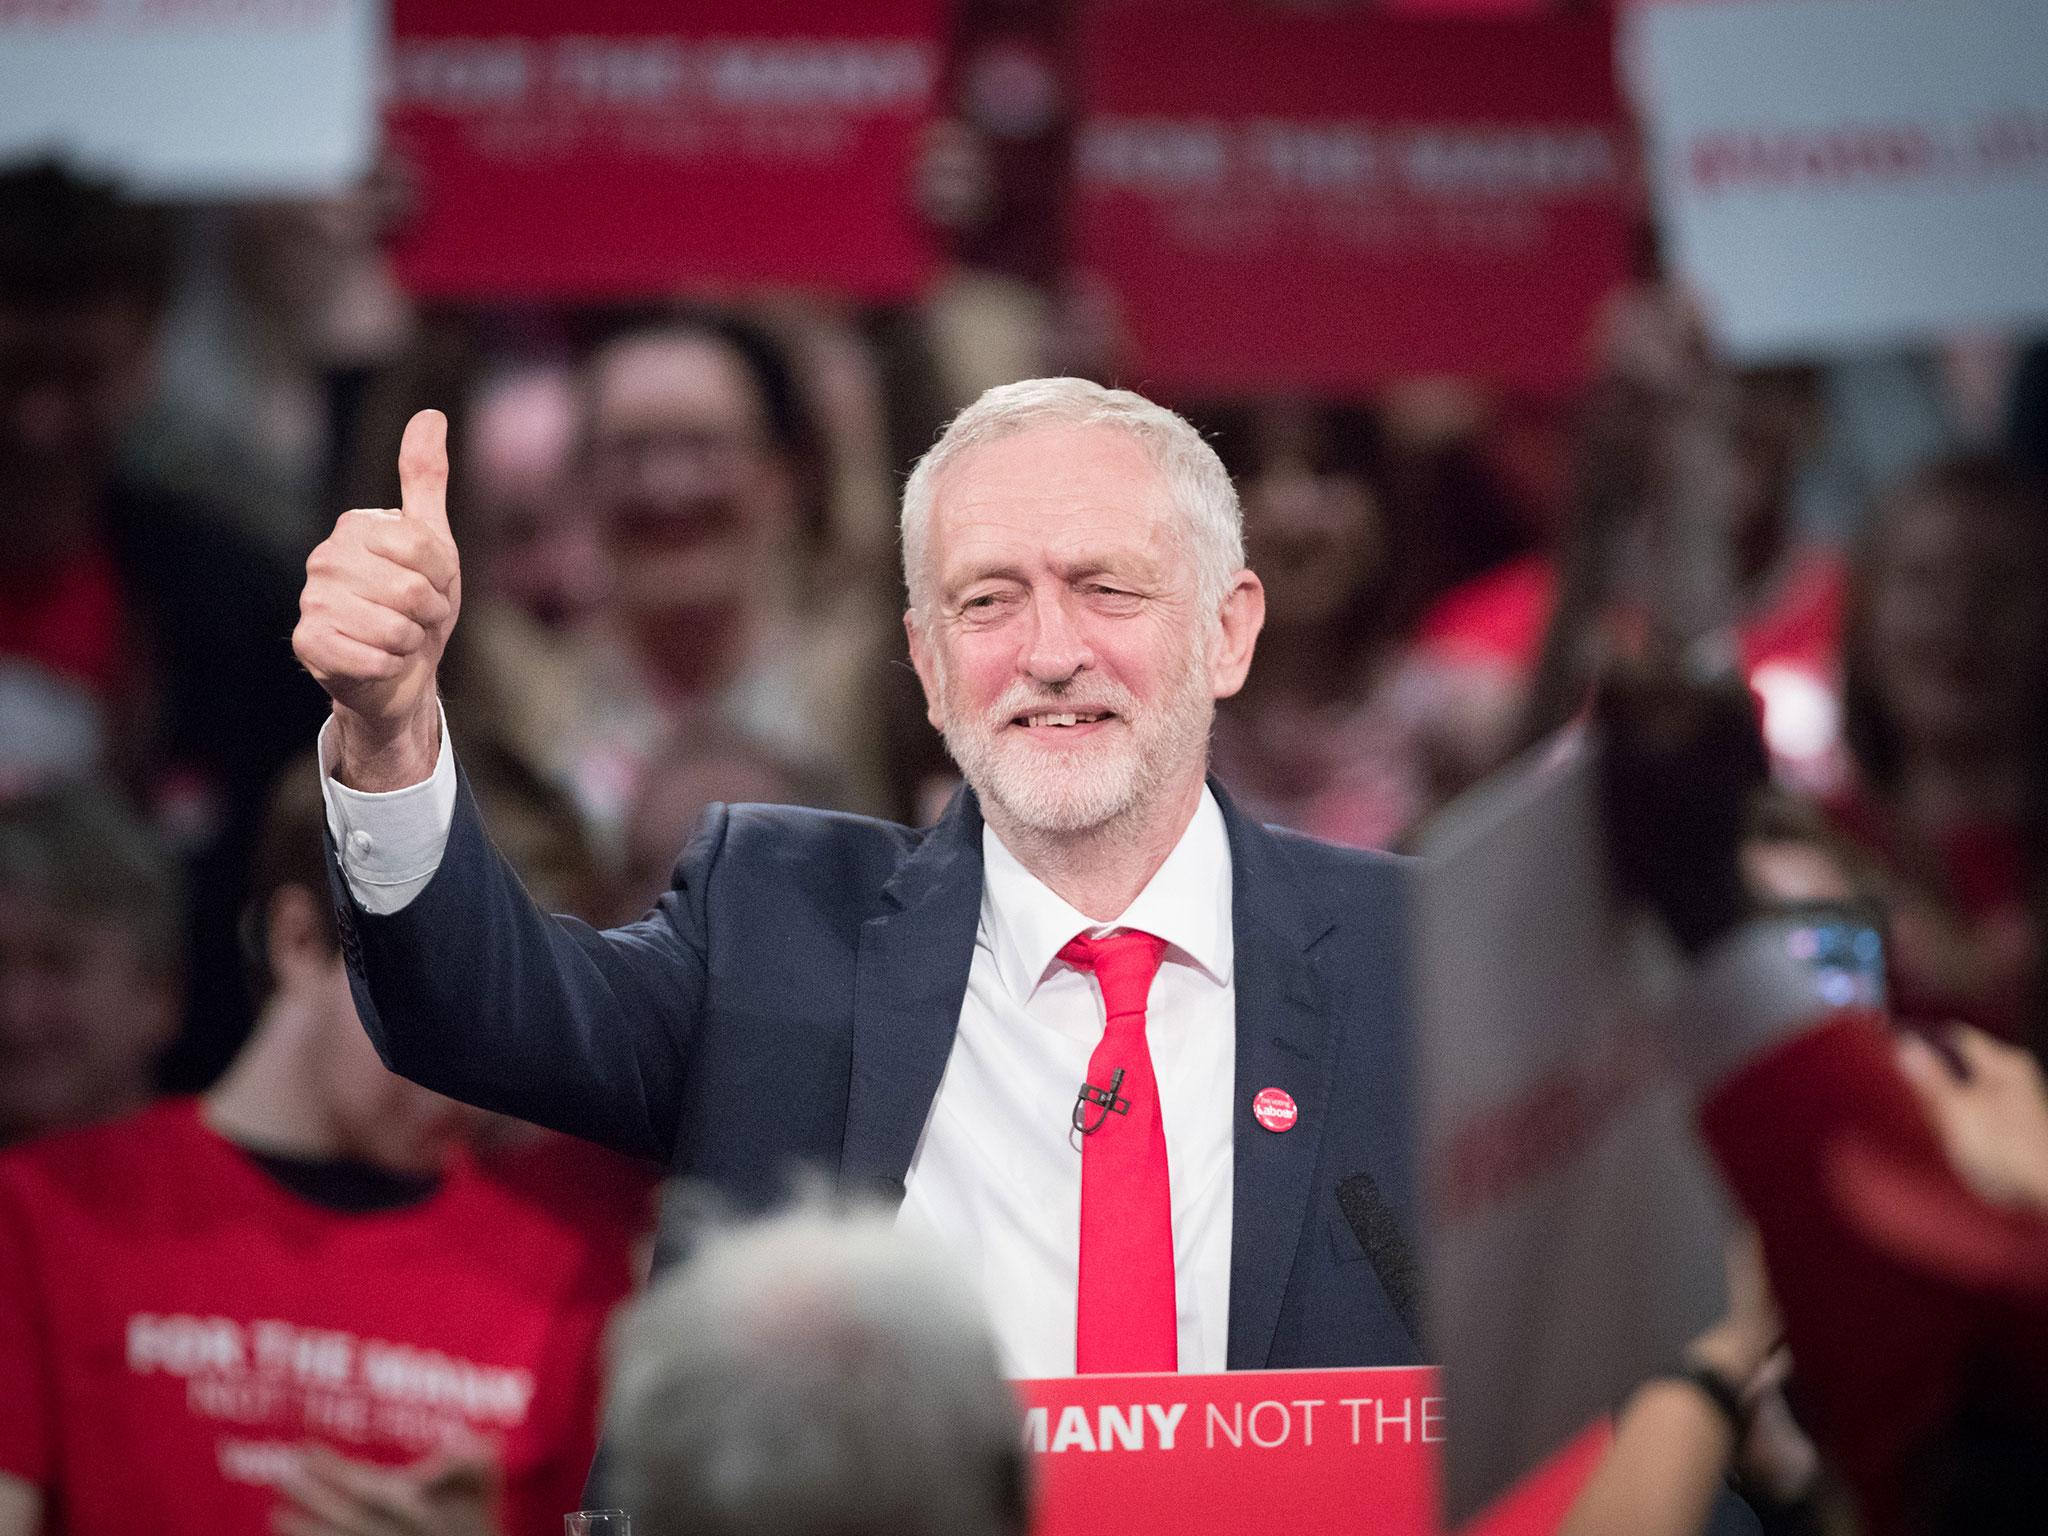 Party has made consistent gains in recent weeks as leader Jeremy Corbyn claimed his message was finally getting through to voters